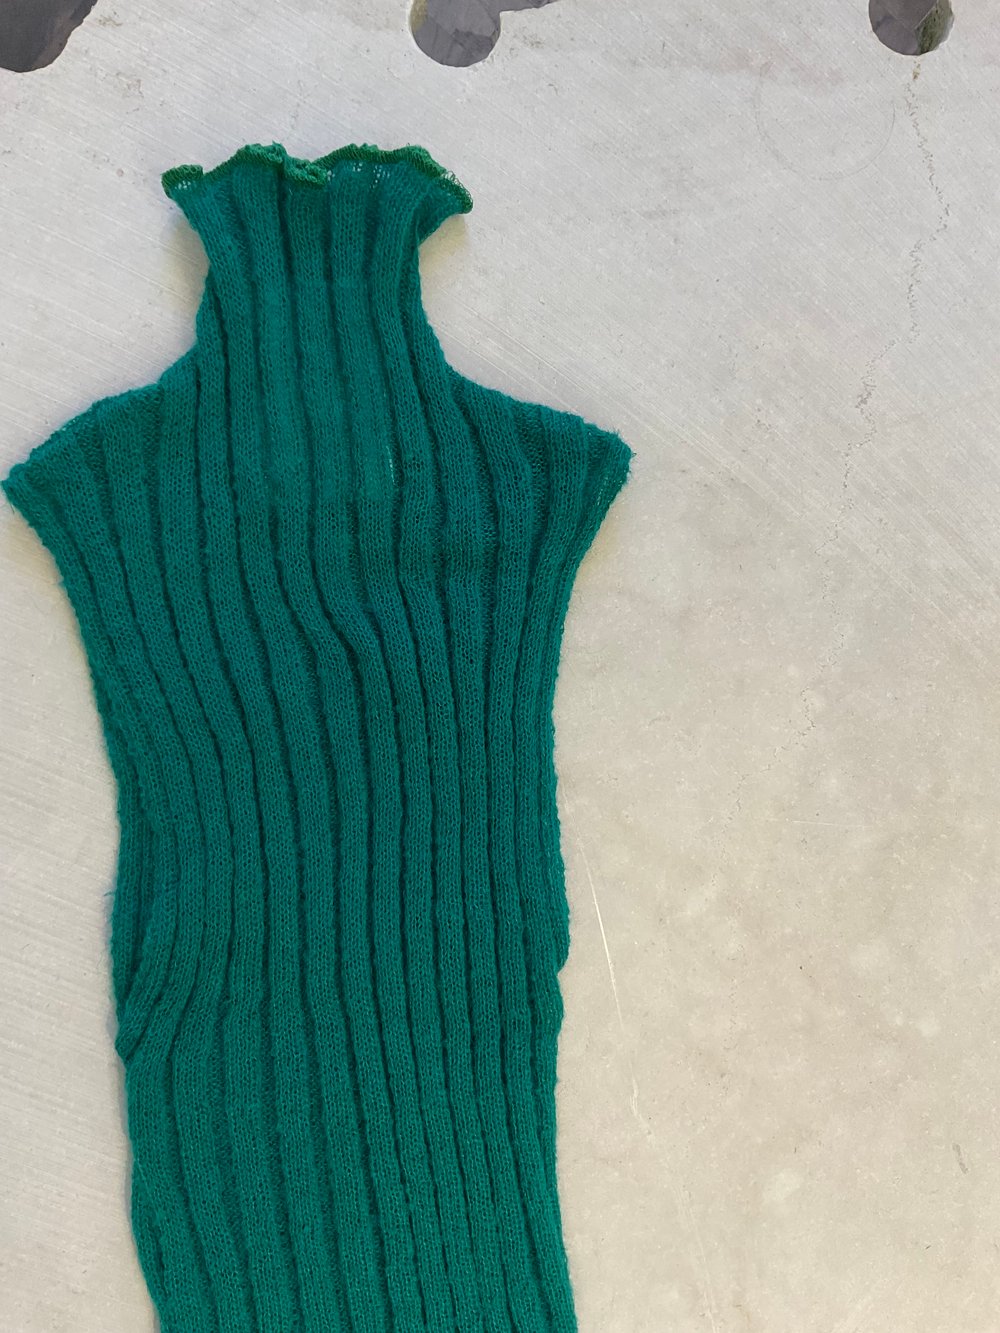 Mohair ribb knitted top dark green 